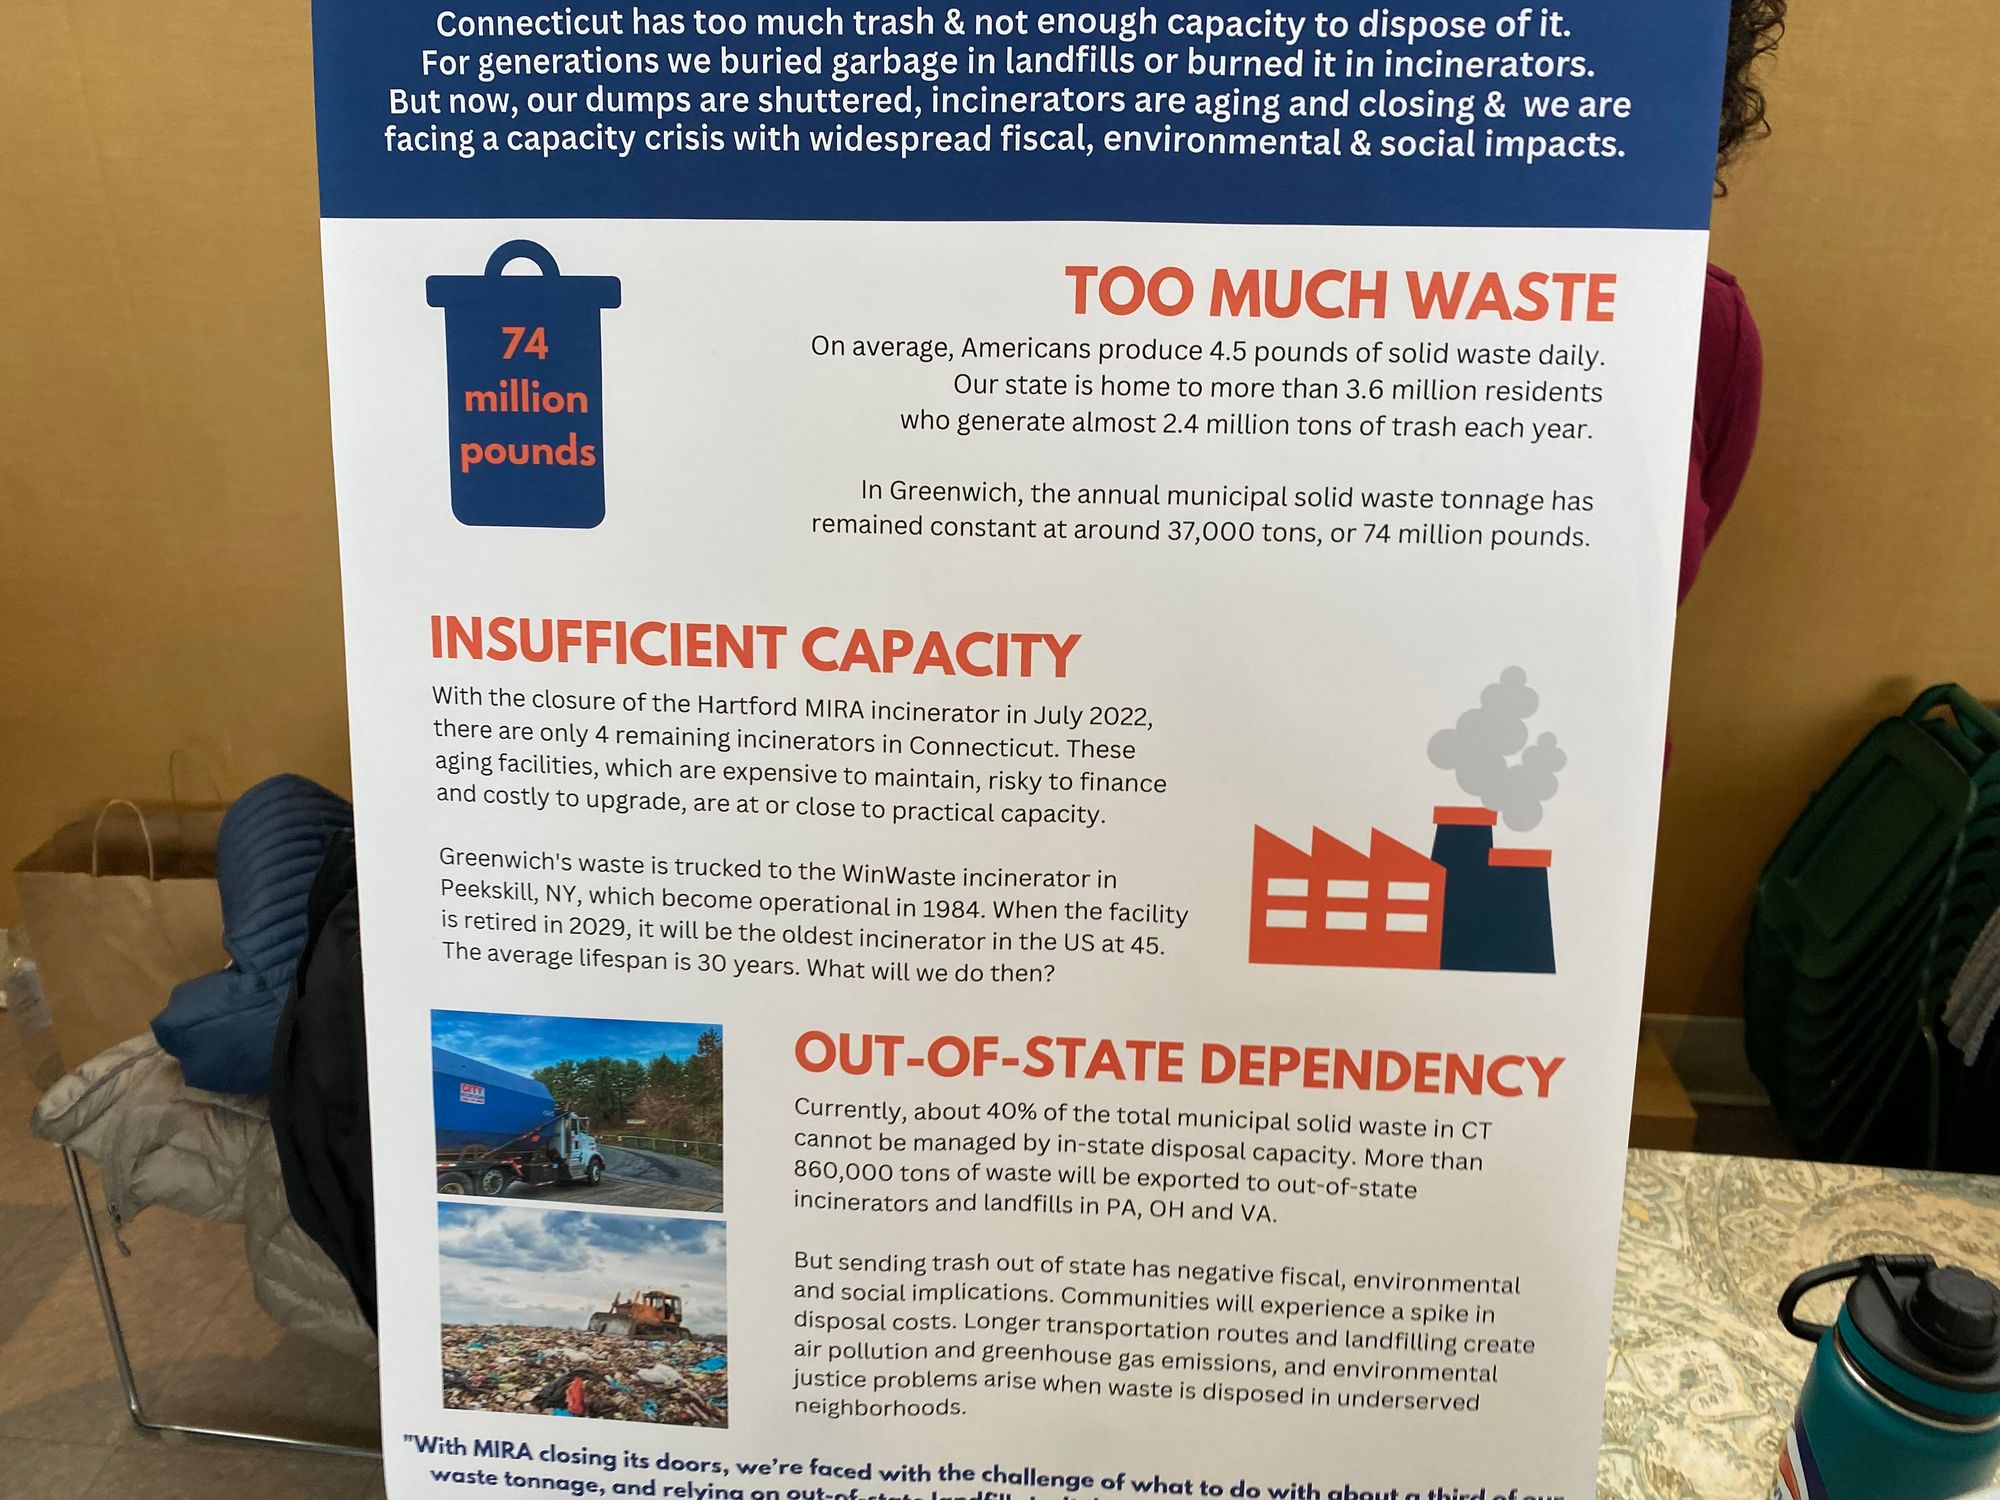 A look at why Connecticut is dealing with a waste crisis